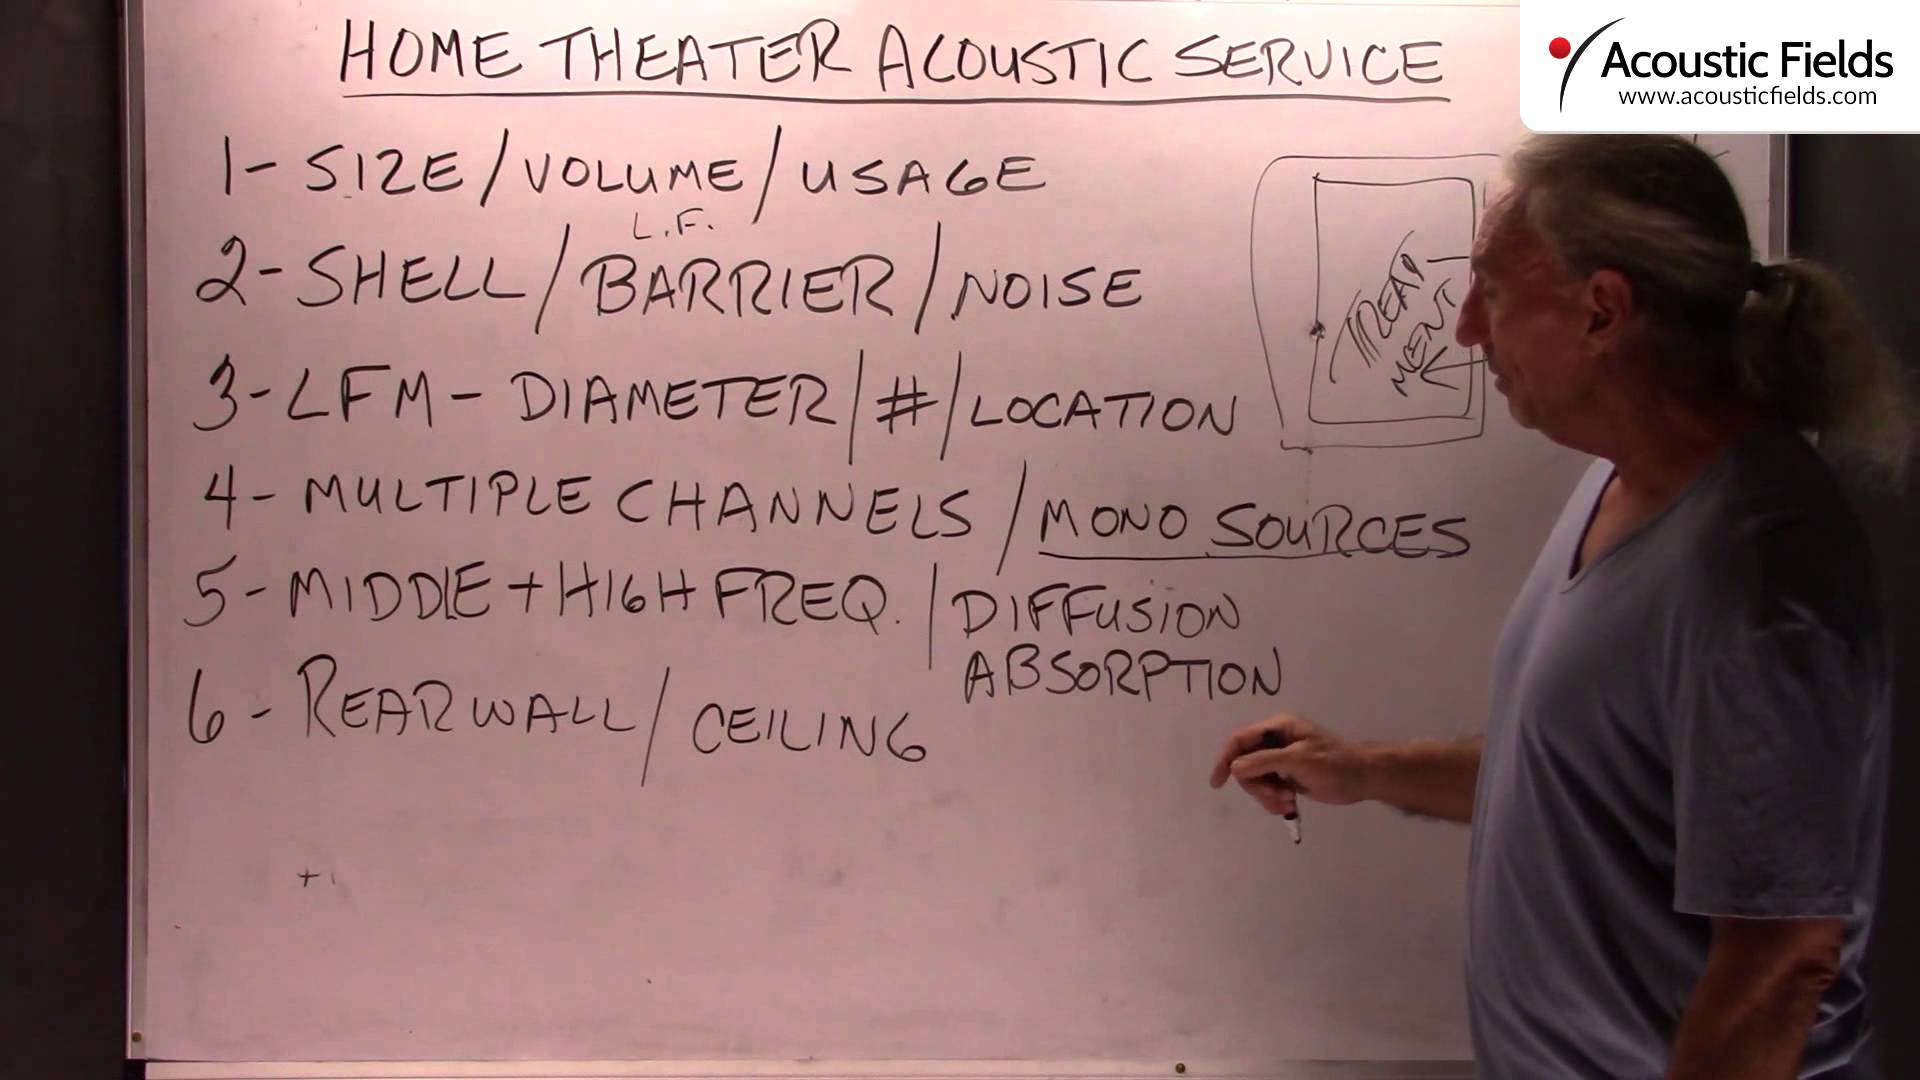 Home Theater Acoustic Service